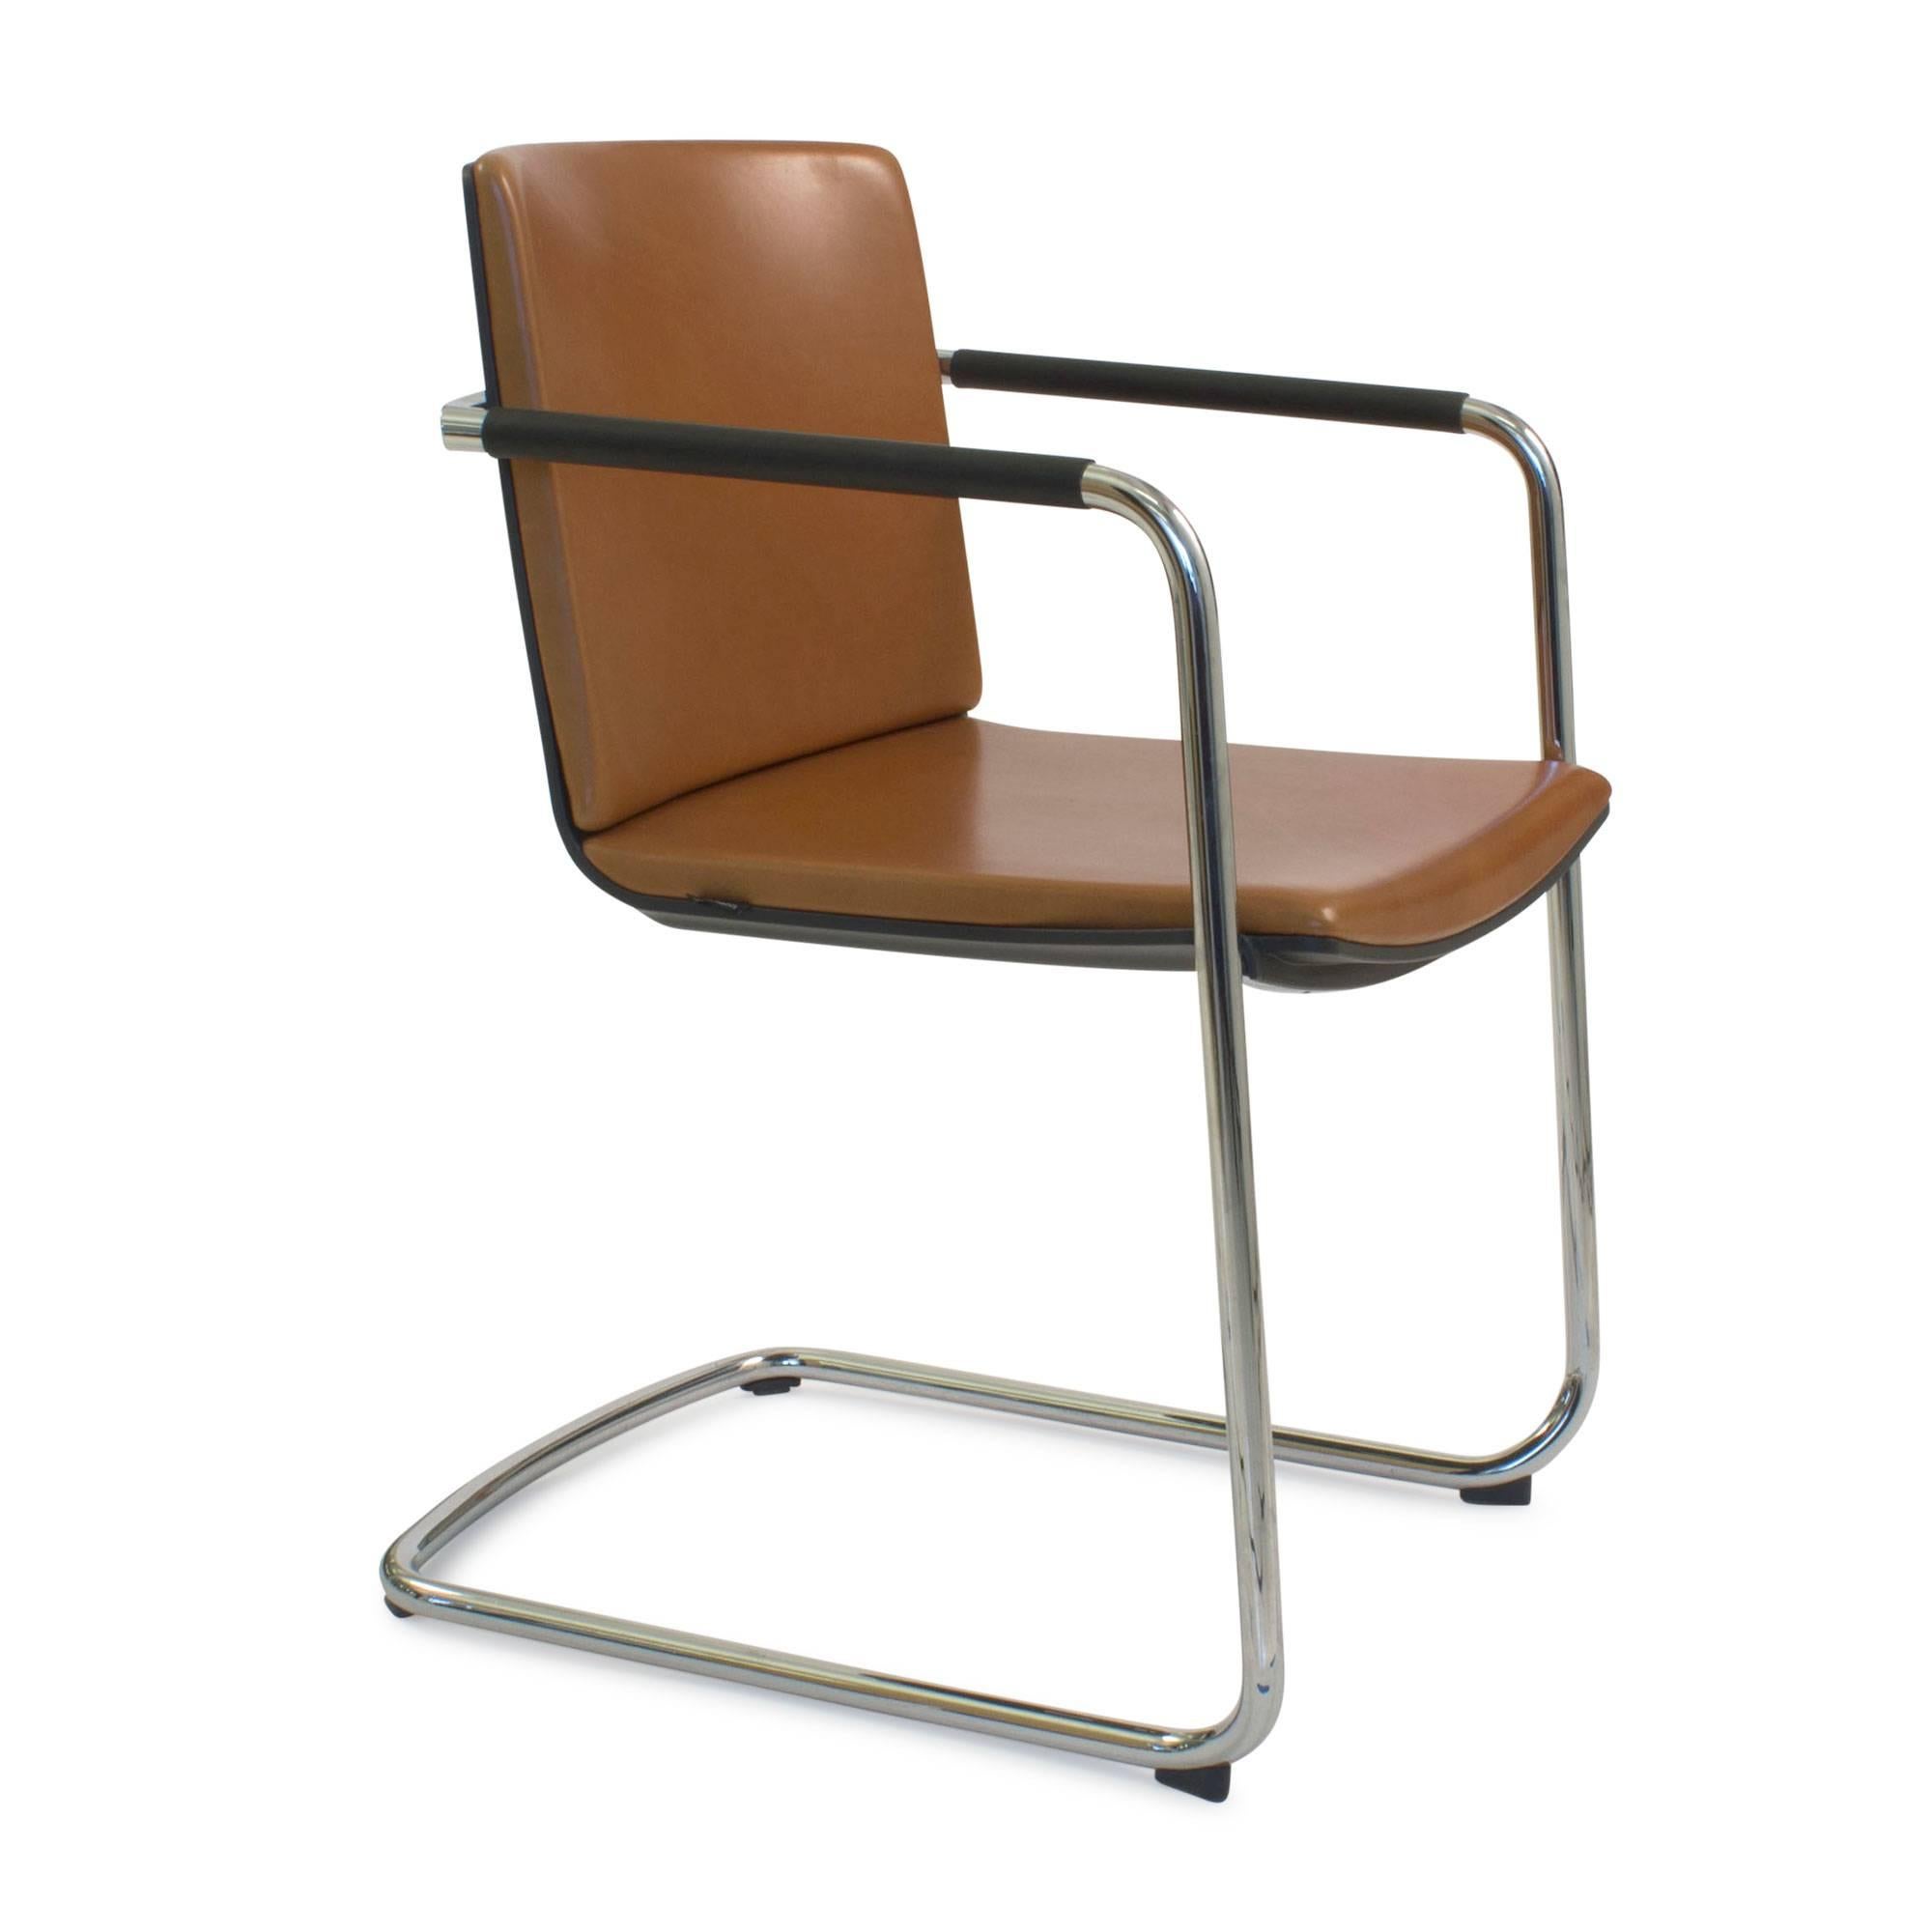 The cantilever chair consists of a slender, bright chromium-plated tubular steel frame connected to an elegant tapered outer rail. The space between the outer rail and the shell is not just simply a smart detail: the rail is also a handle and at the